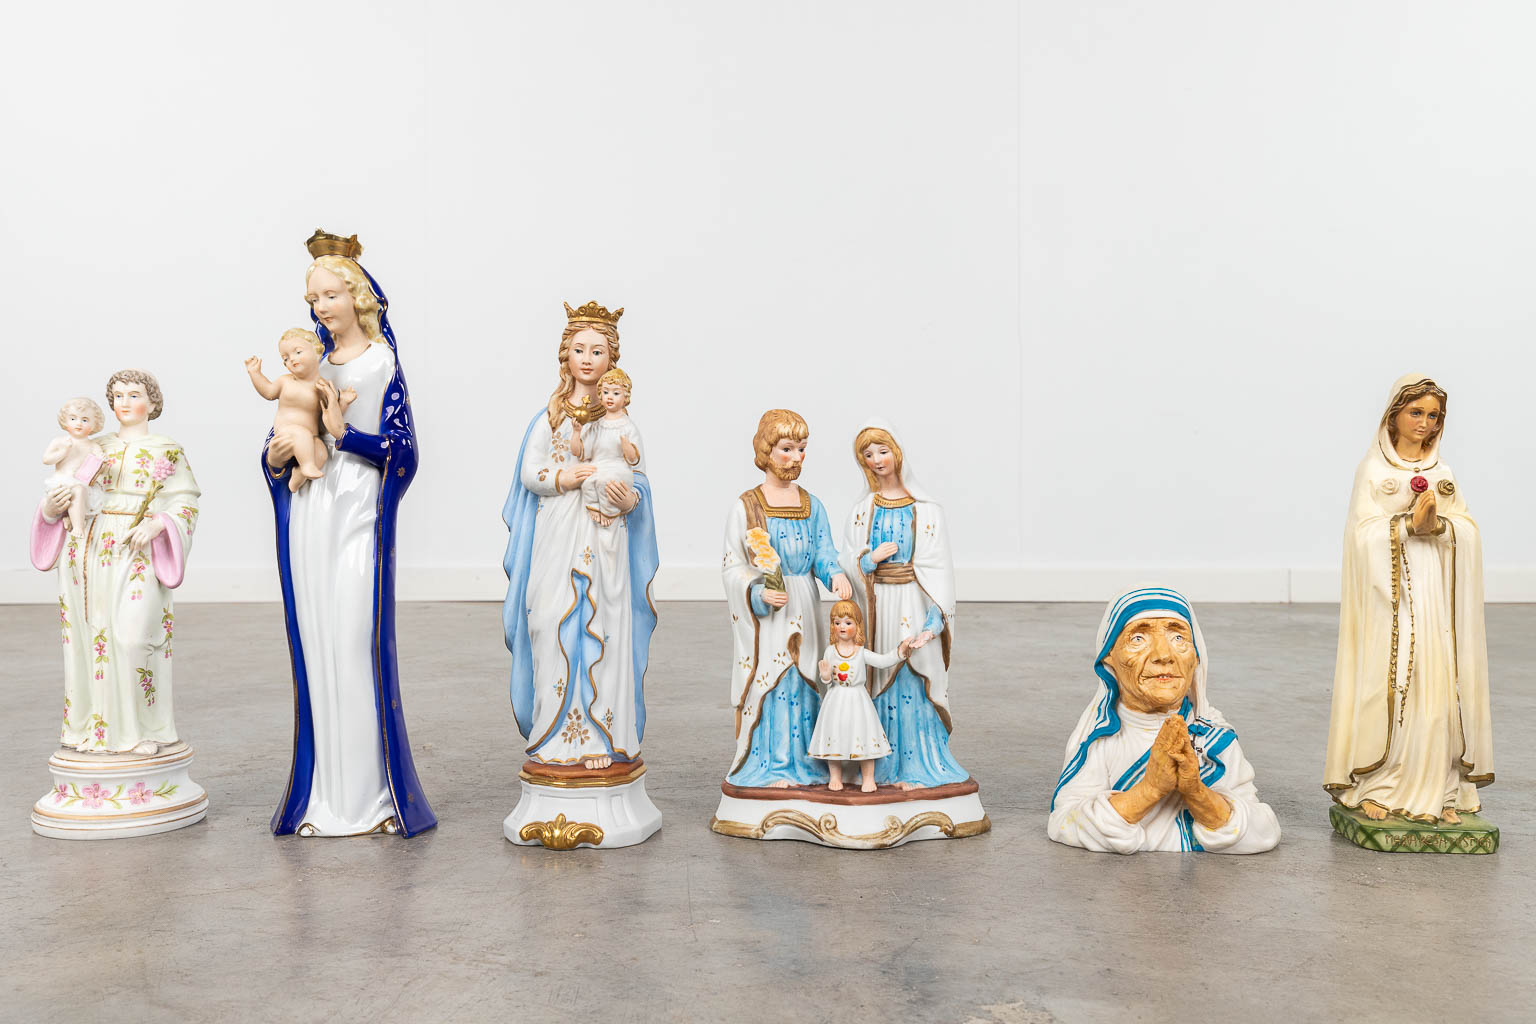 A collection of 11 holy figurines, porcelain, plaster. (H: 46 cm)